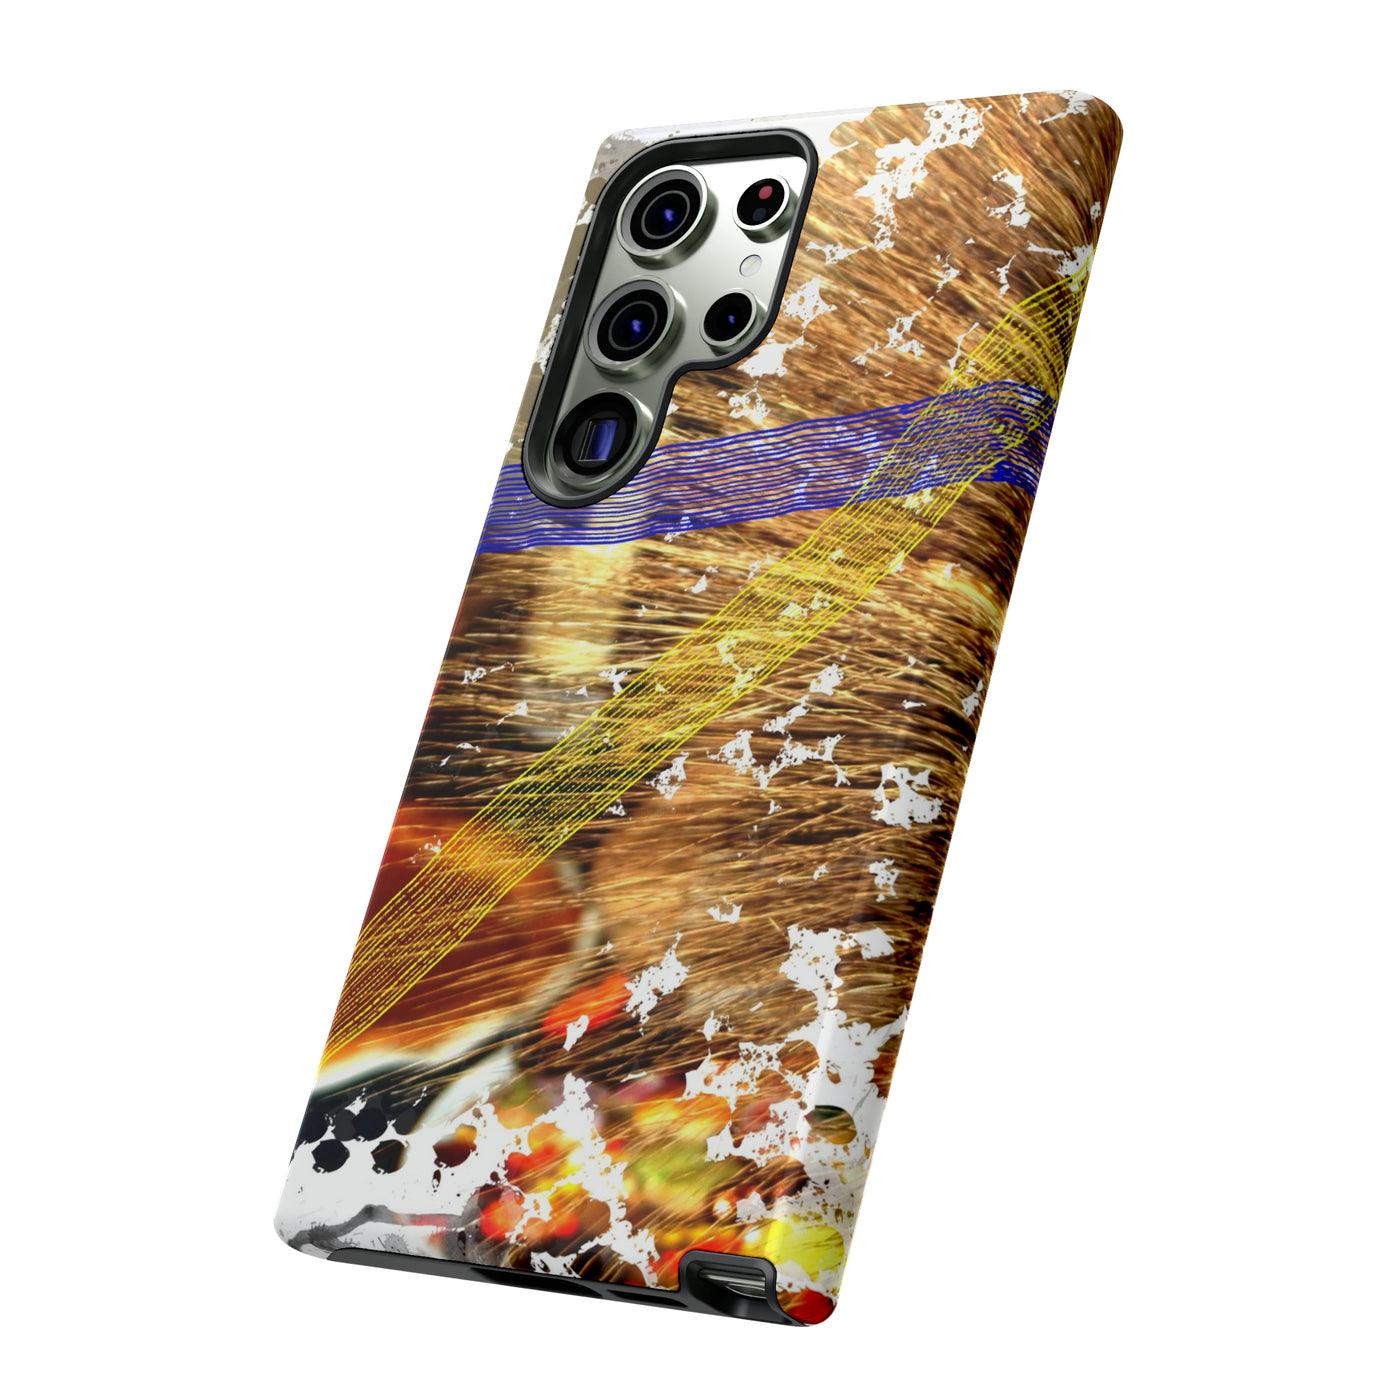 Cute Samsung Phone Case | Aesthetic Samsung Phone Case | Fall Pecan Pie | Galaxy S23, S22, S21, S20 | Luxury Double Layer | Cool